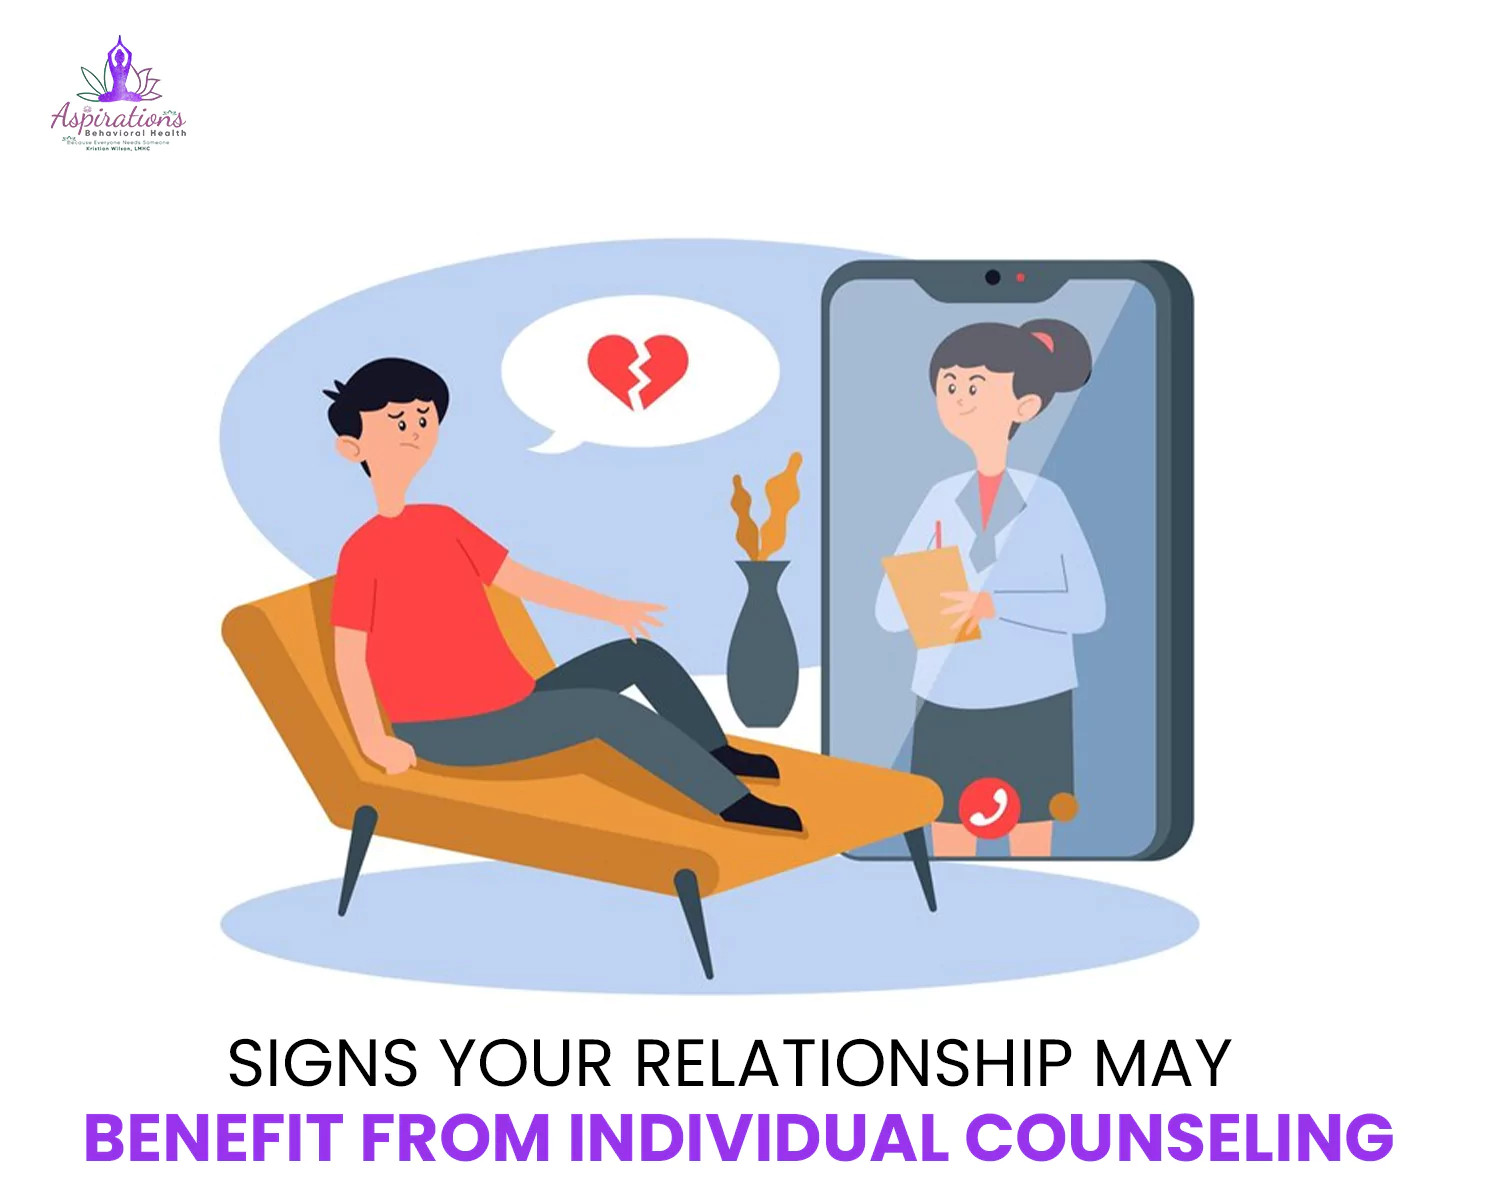 Signs Your Relationship May Benefit from Individual Counseling